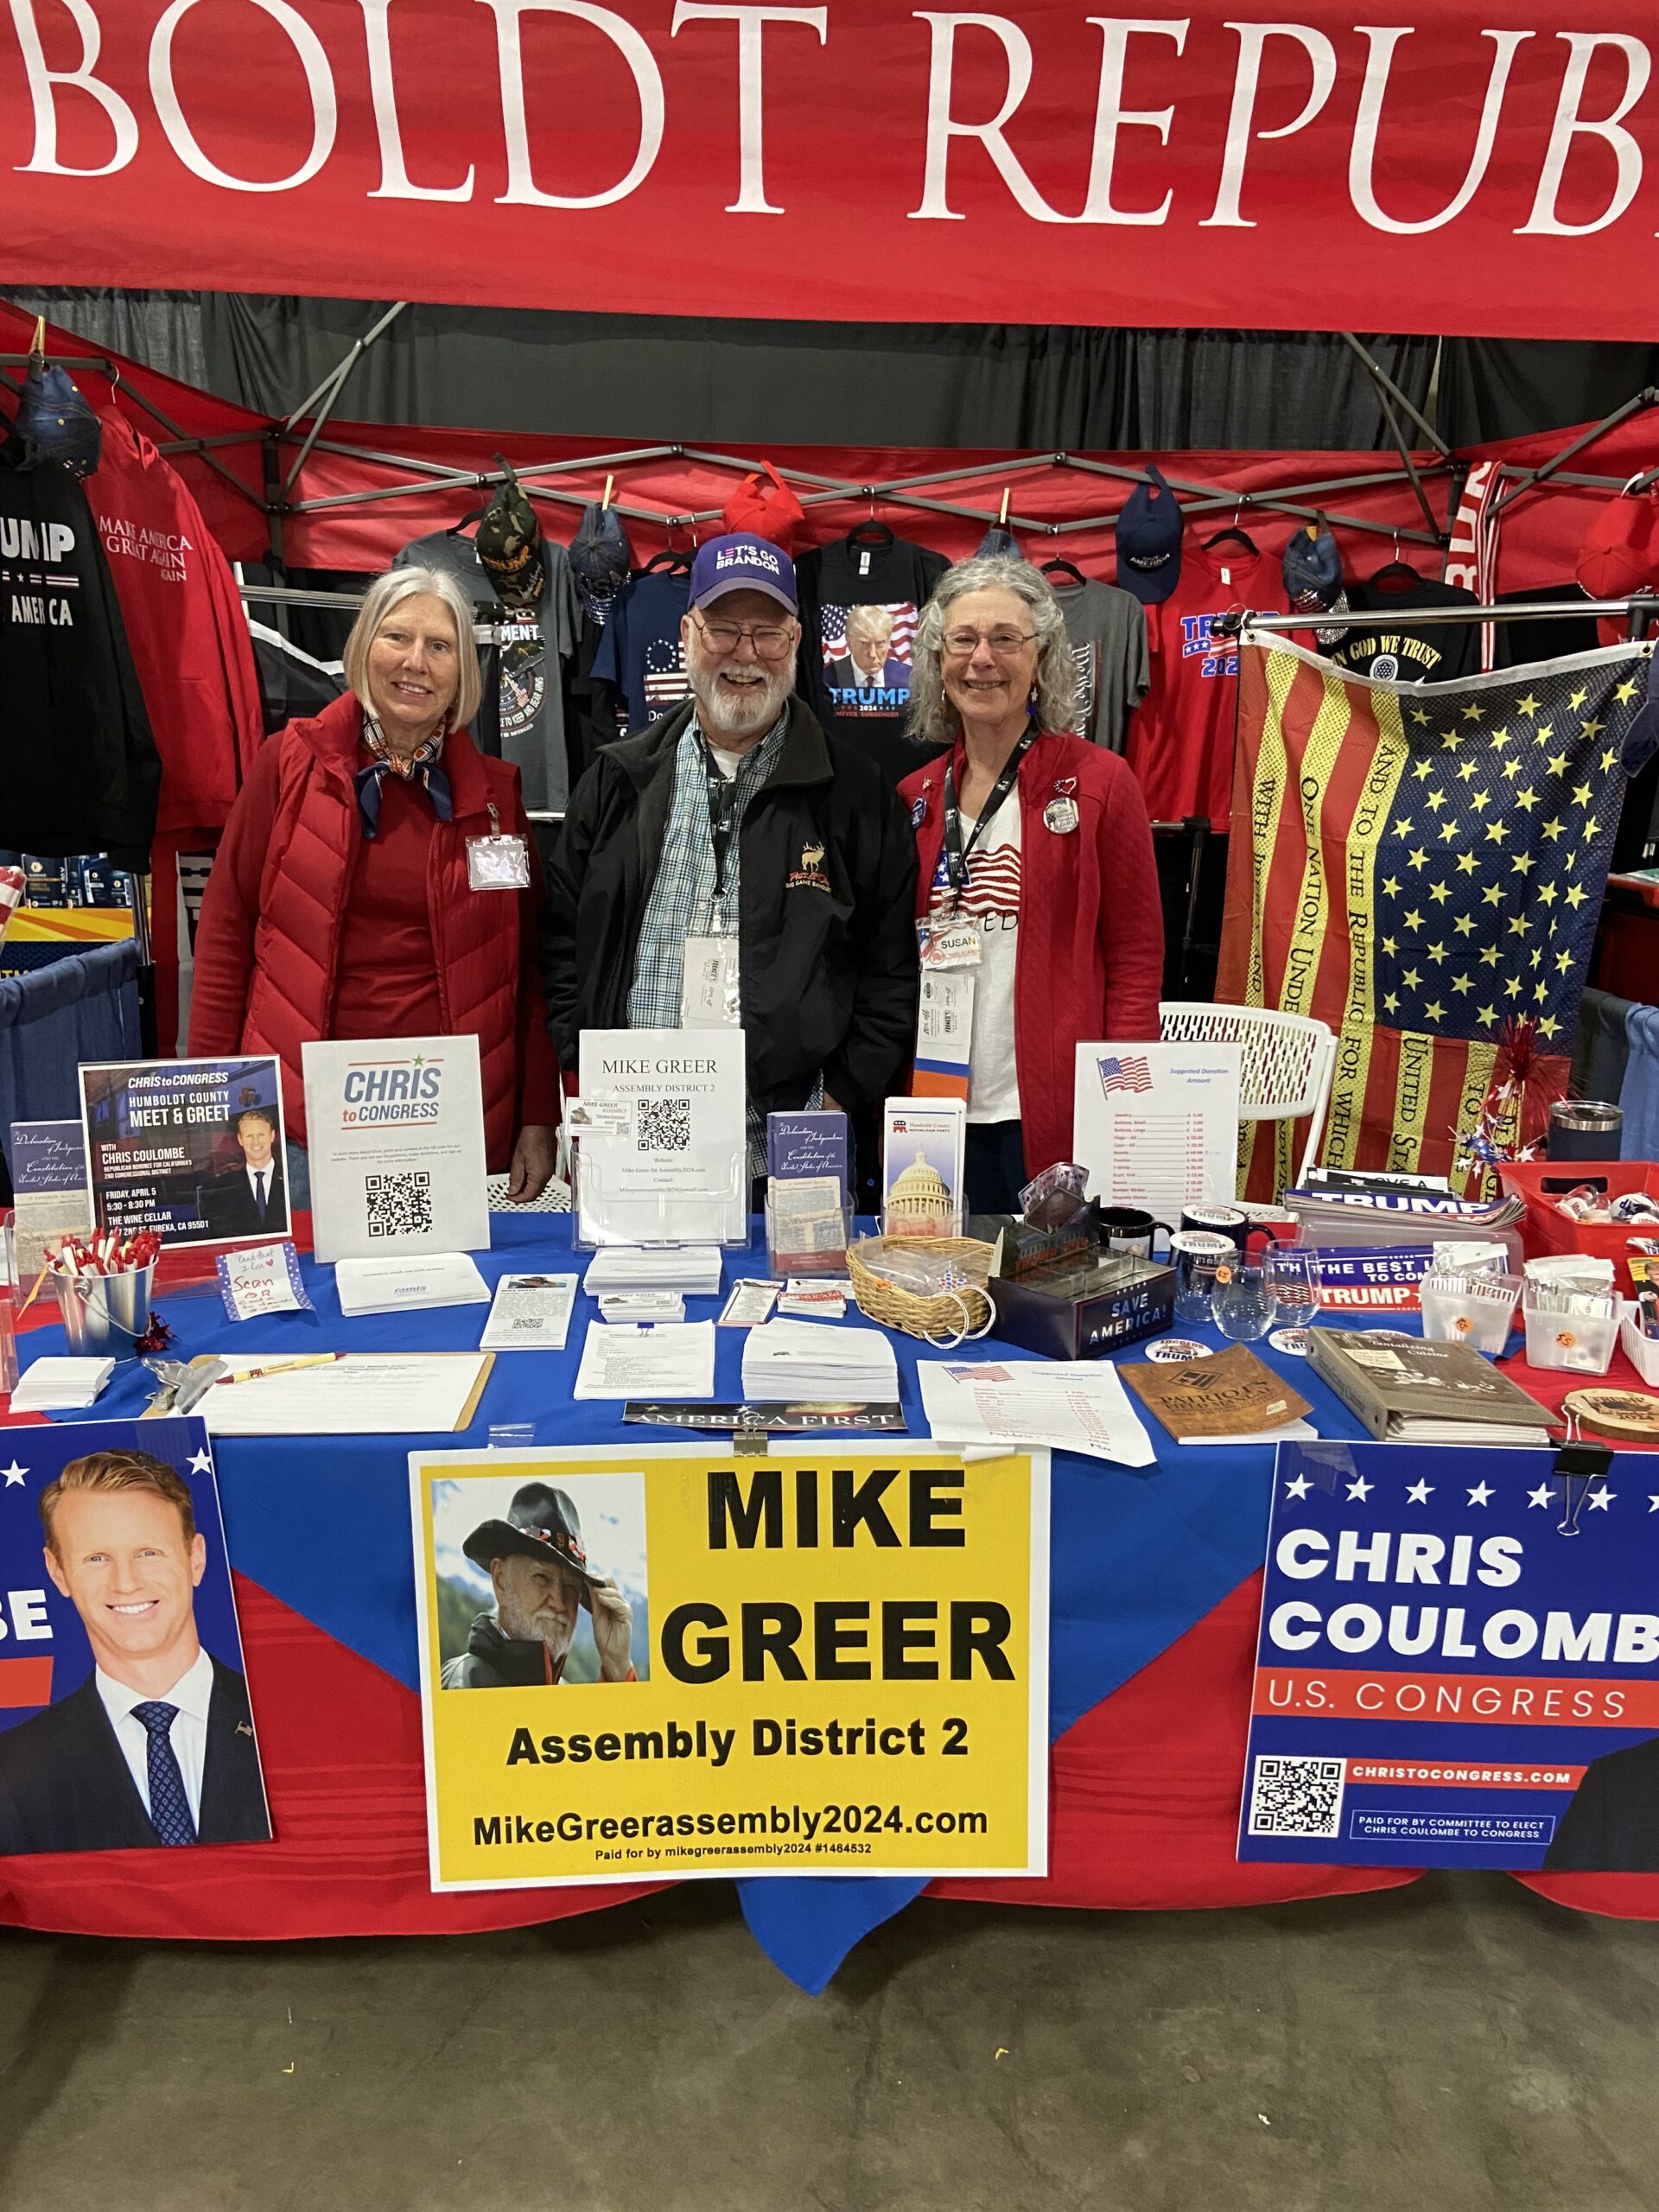 Humboldt County Republican Party event booth